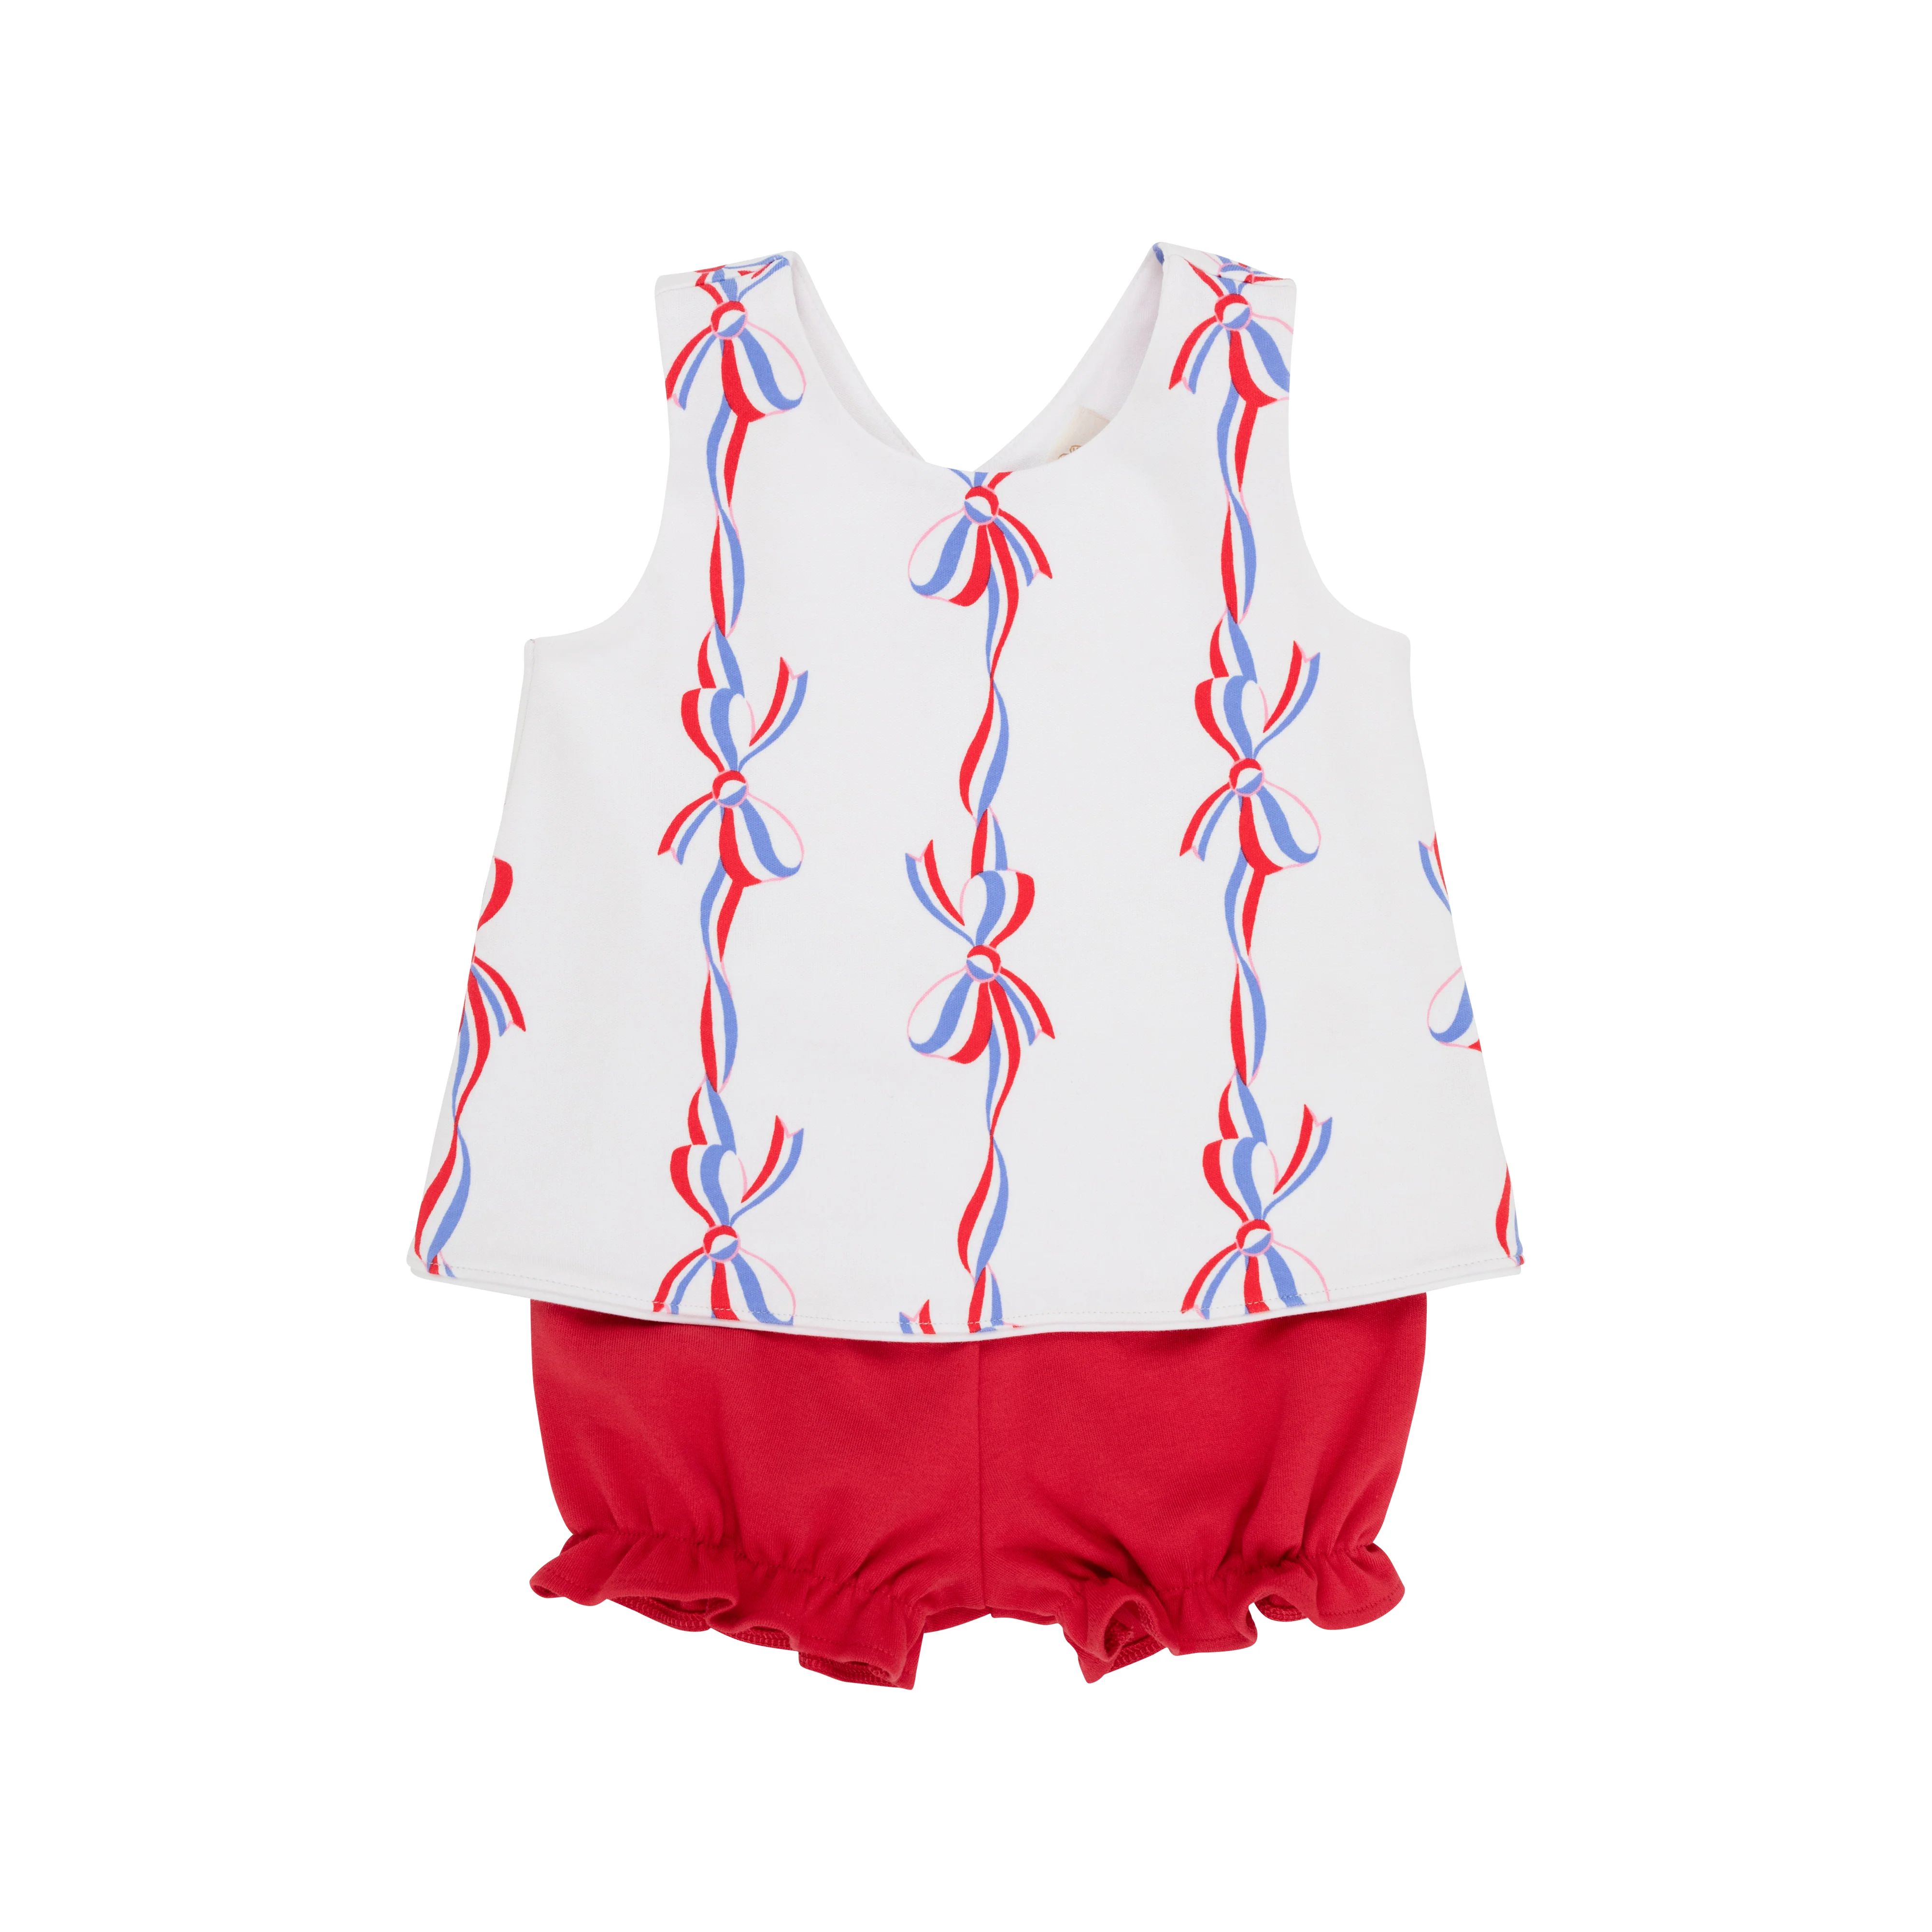 Bettye Bloomer Set - America's Birthday Bows with Richmond Red | The Beaufort Bonnet Company